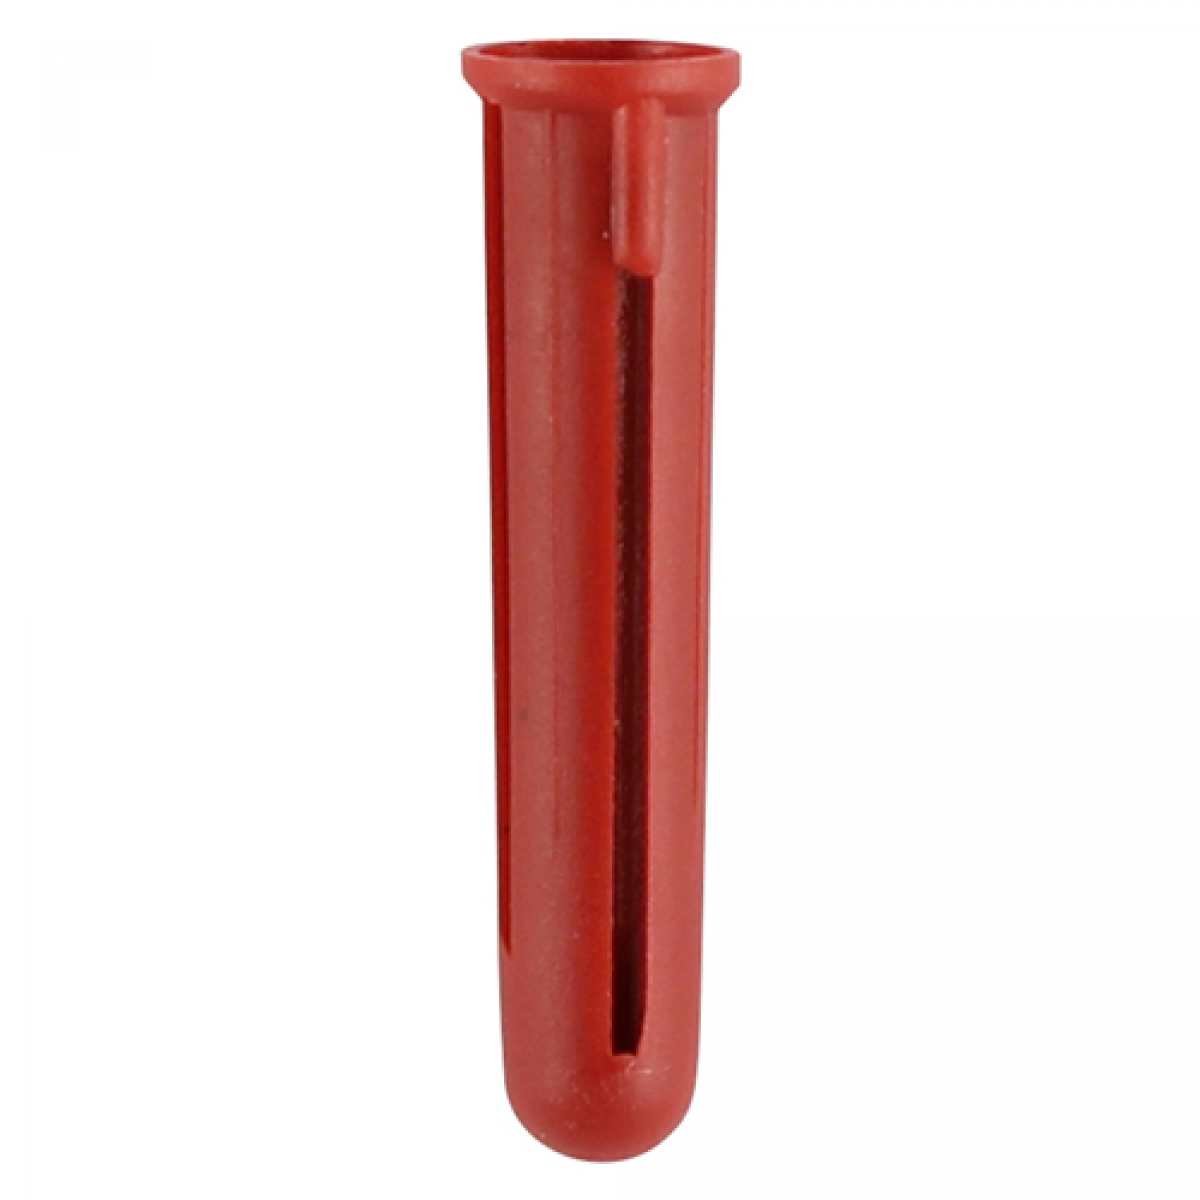 red plastic plug 1 Image by Websters Timber